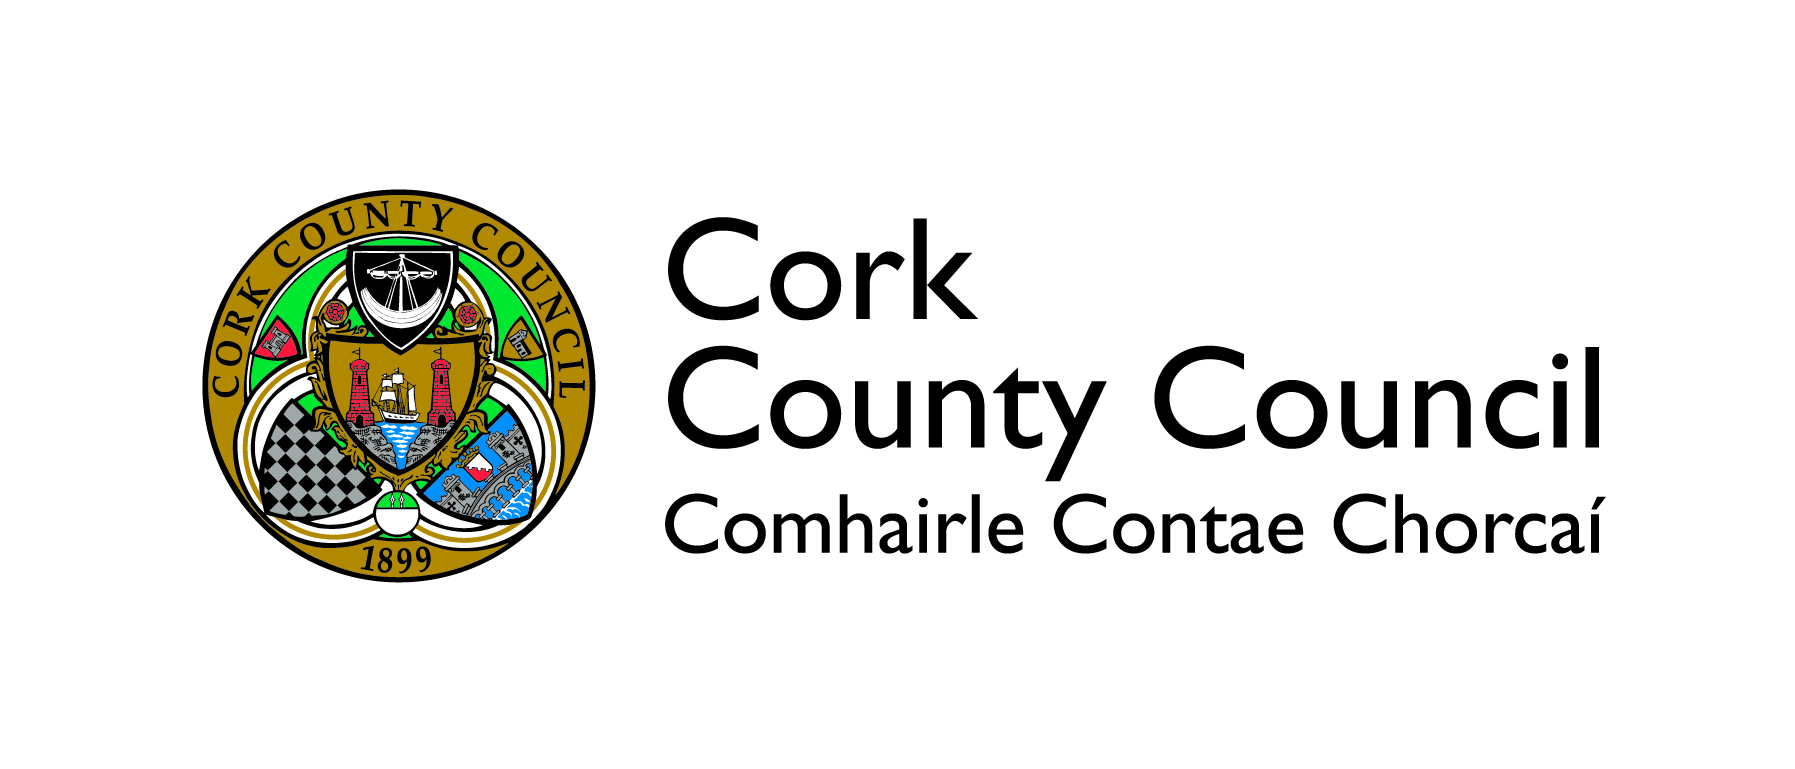 Operational Update from Cork County Council – Effective from 18/05/20